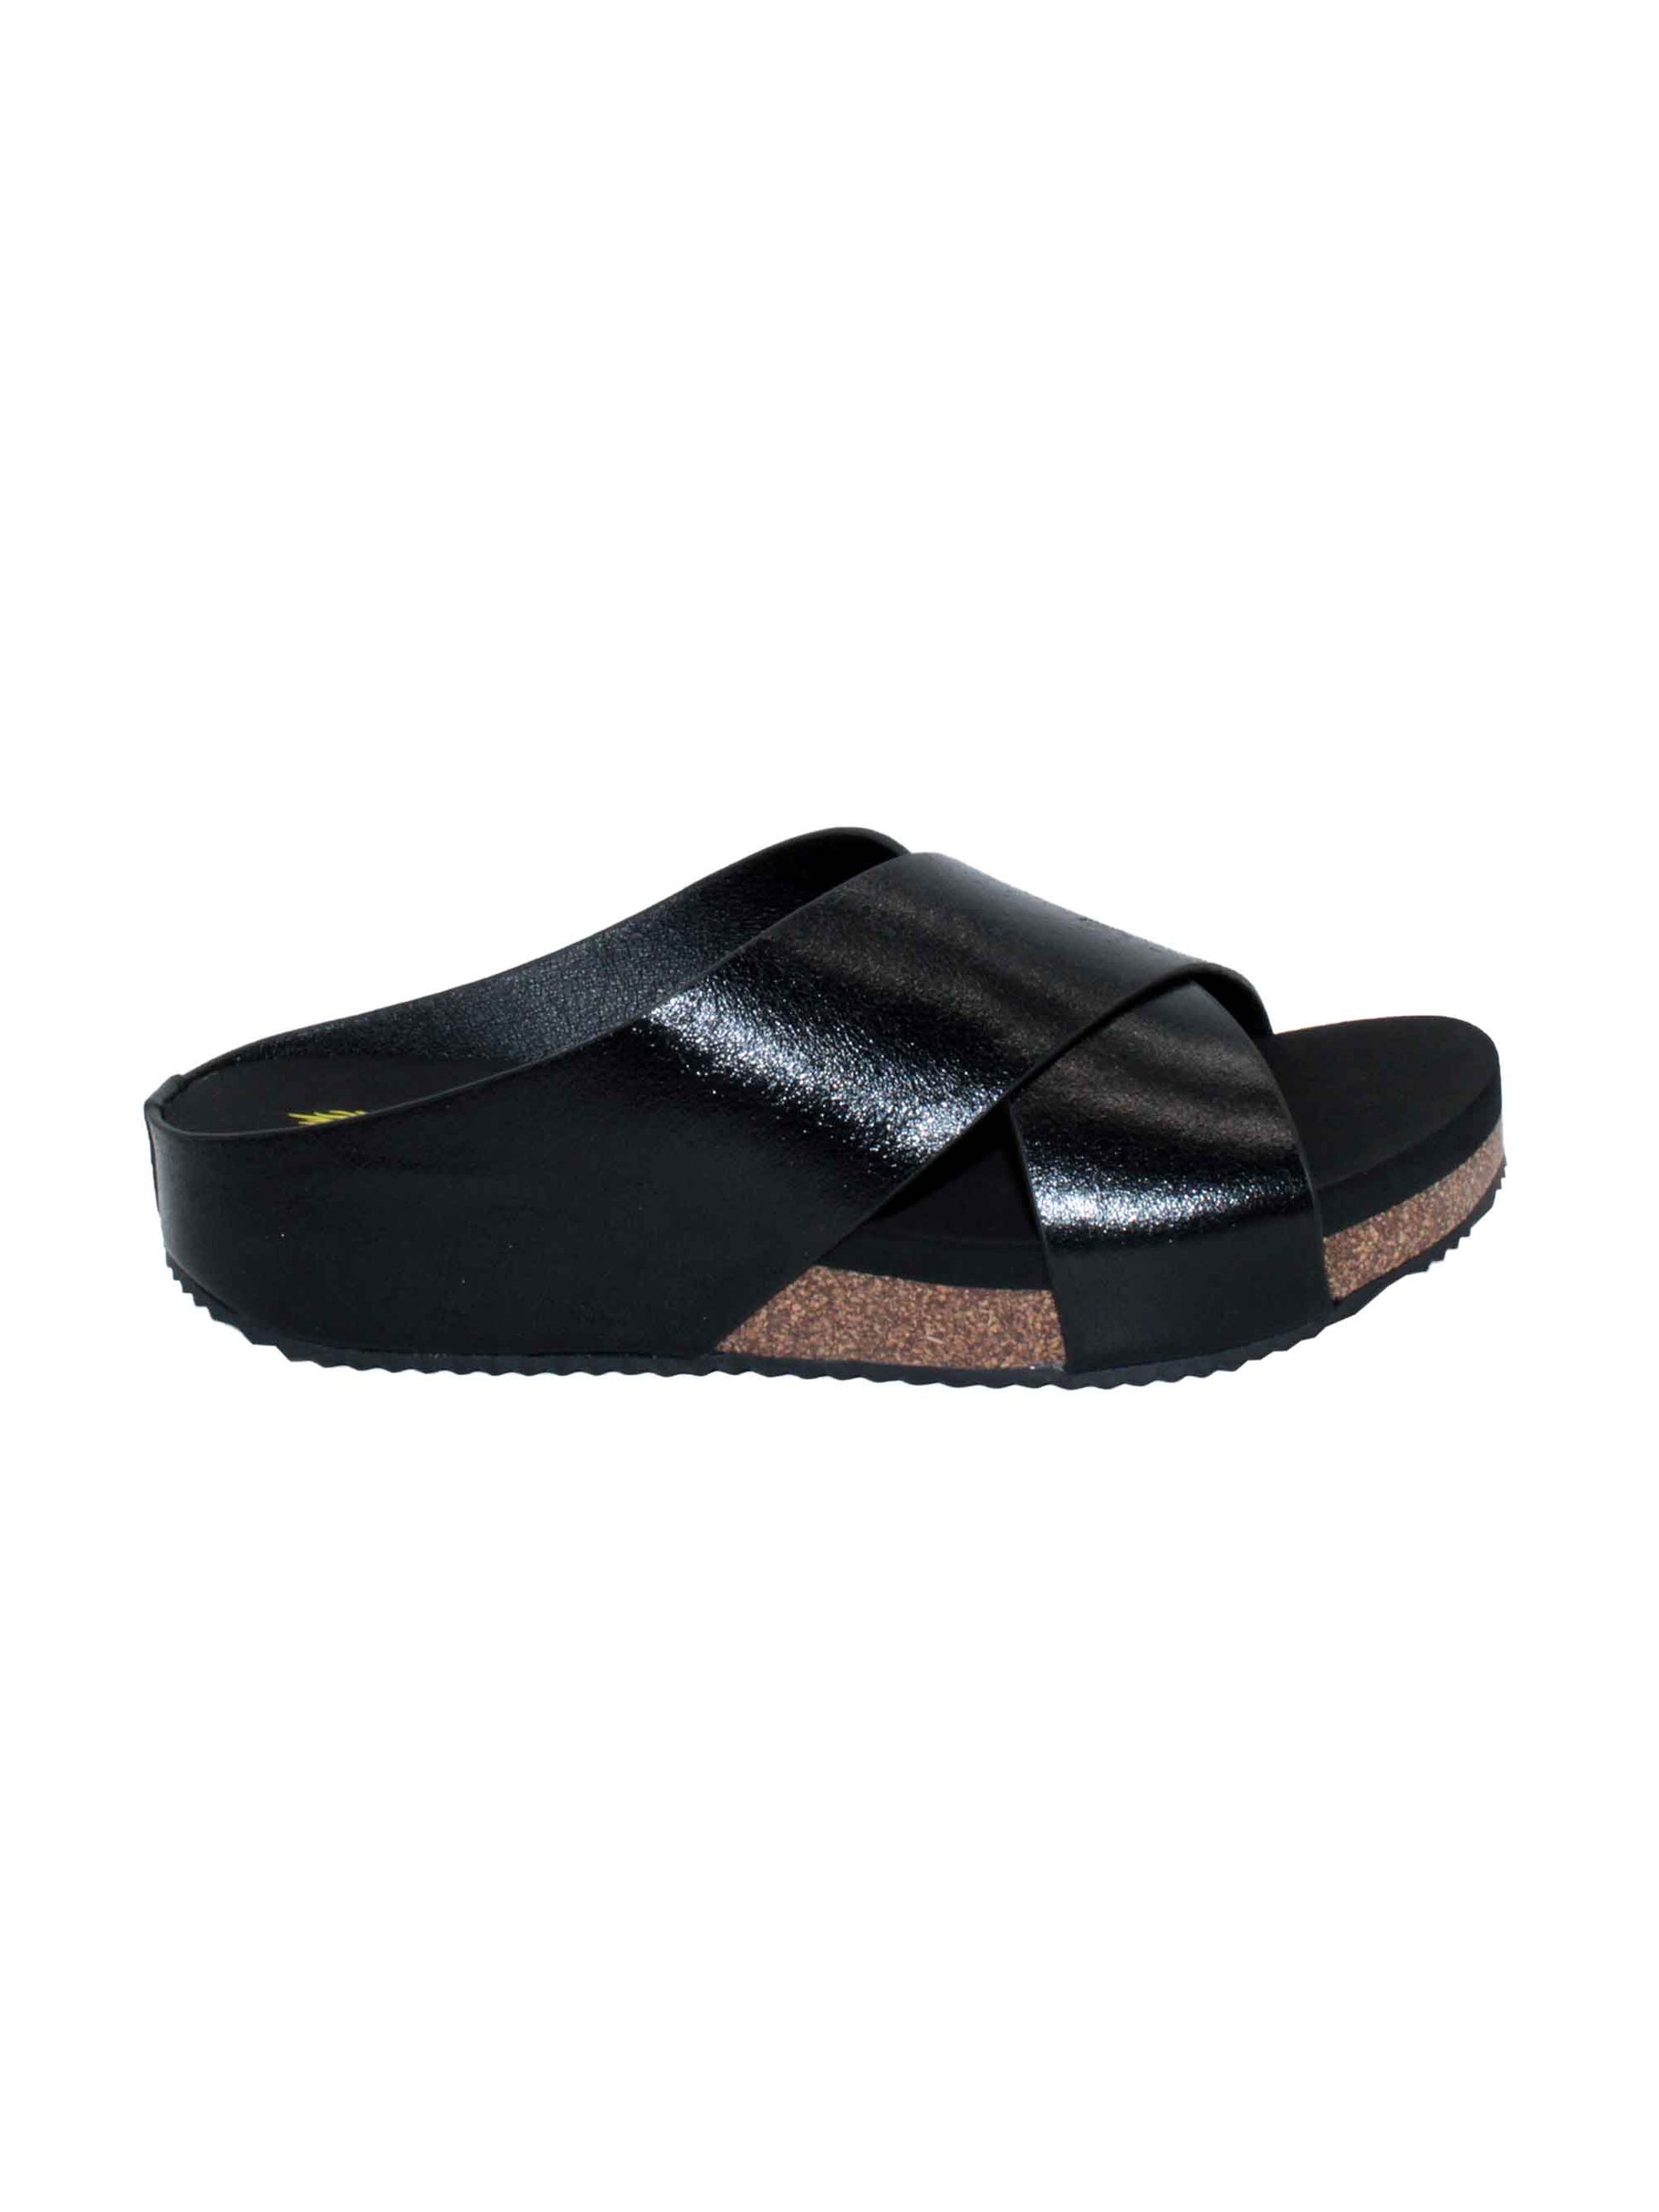 Rustic genuine leather black Slip-on crisscross sandal style Round toe shape Ultra-comfort EVA insole Cork covered wedge Rubber traction outsole Approx. 1.25” heel height